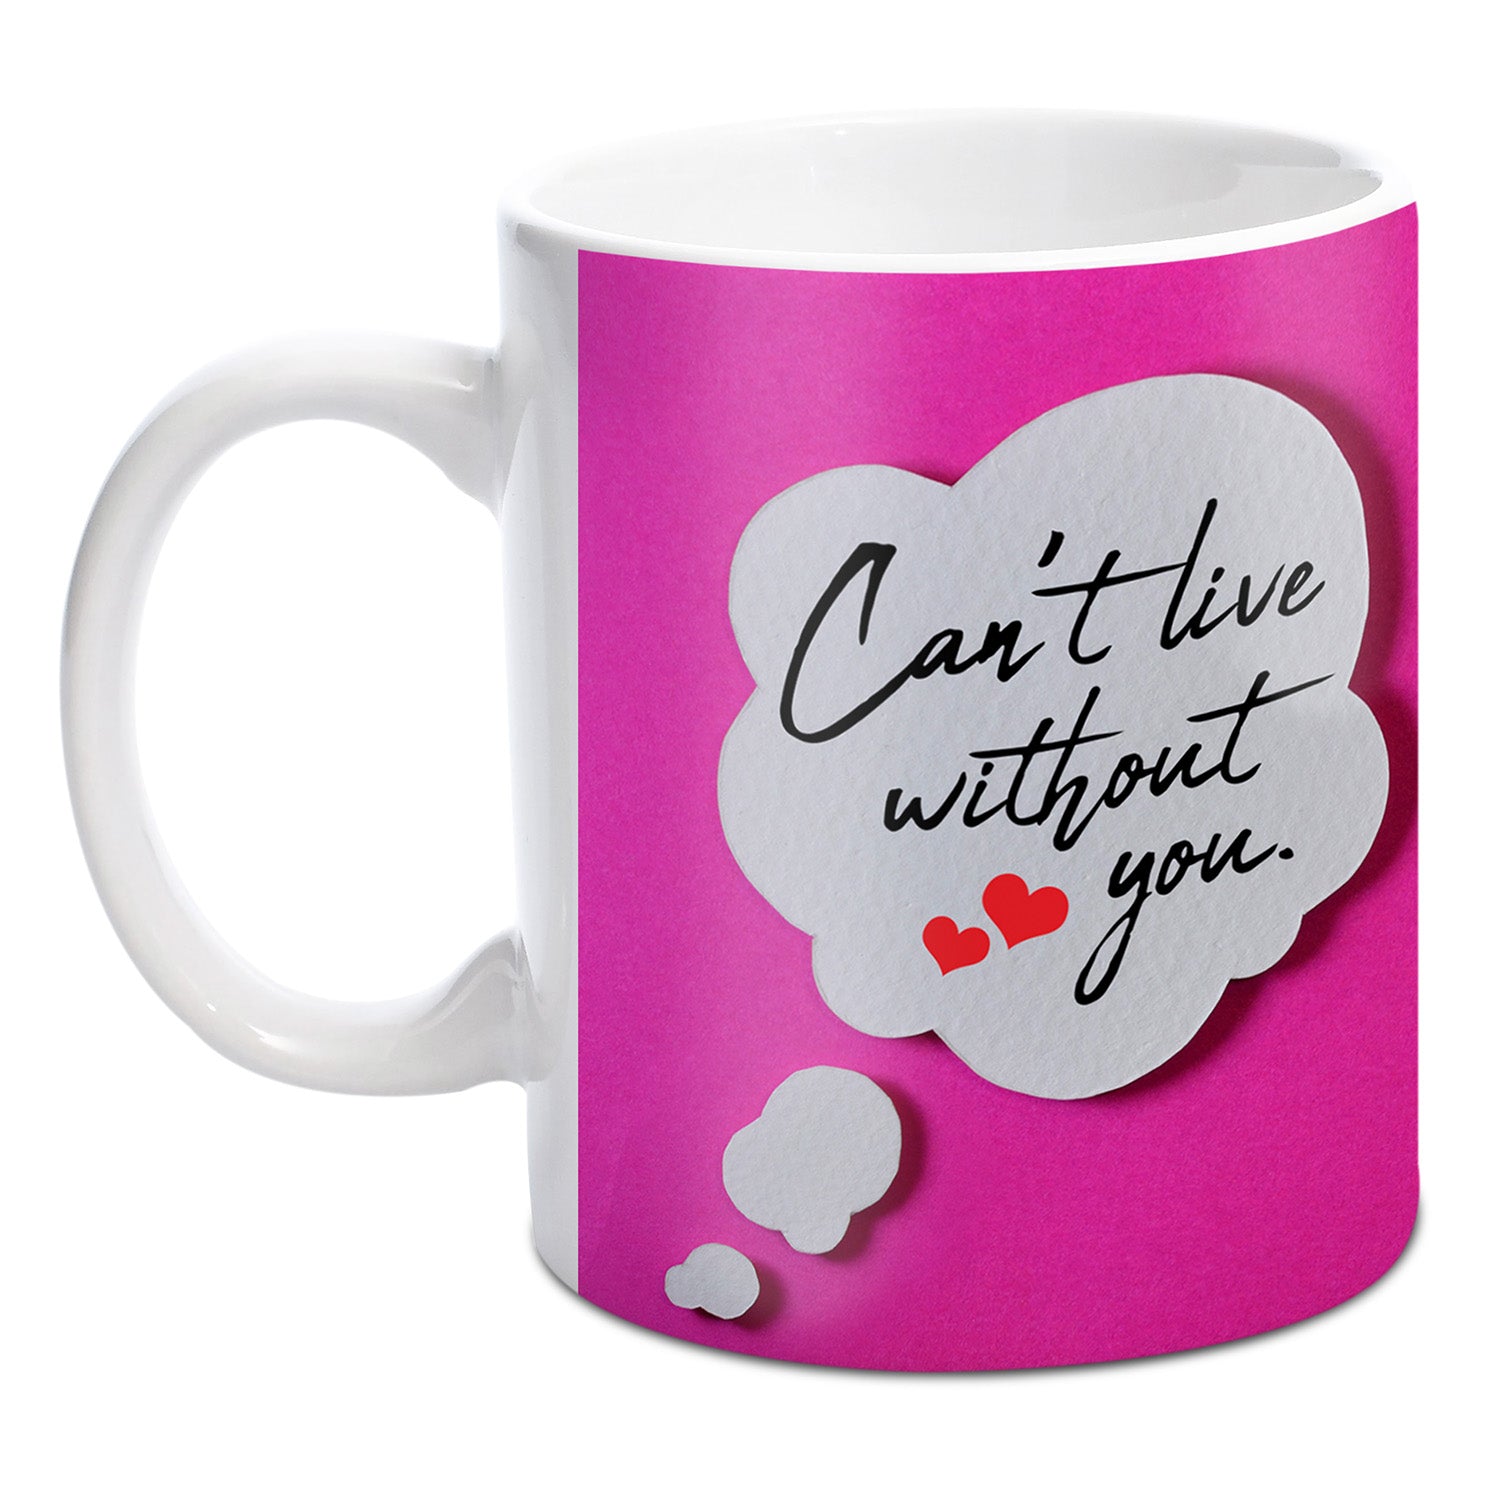 Can't Live without you Mug with Multifold Card